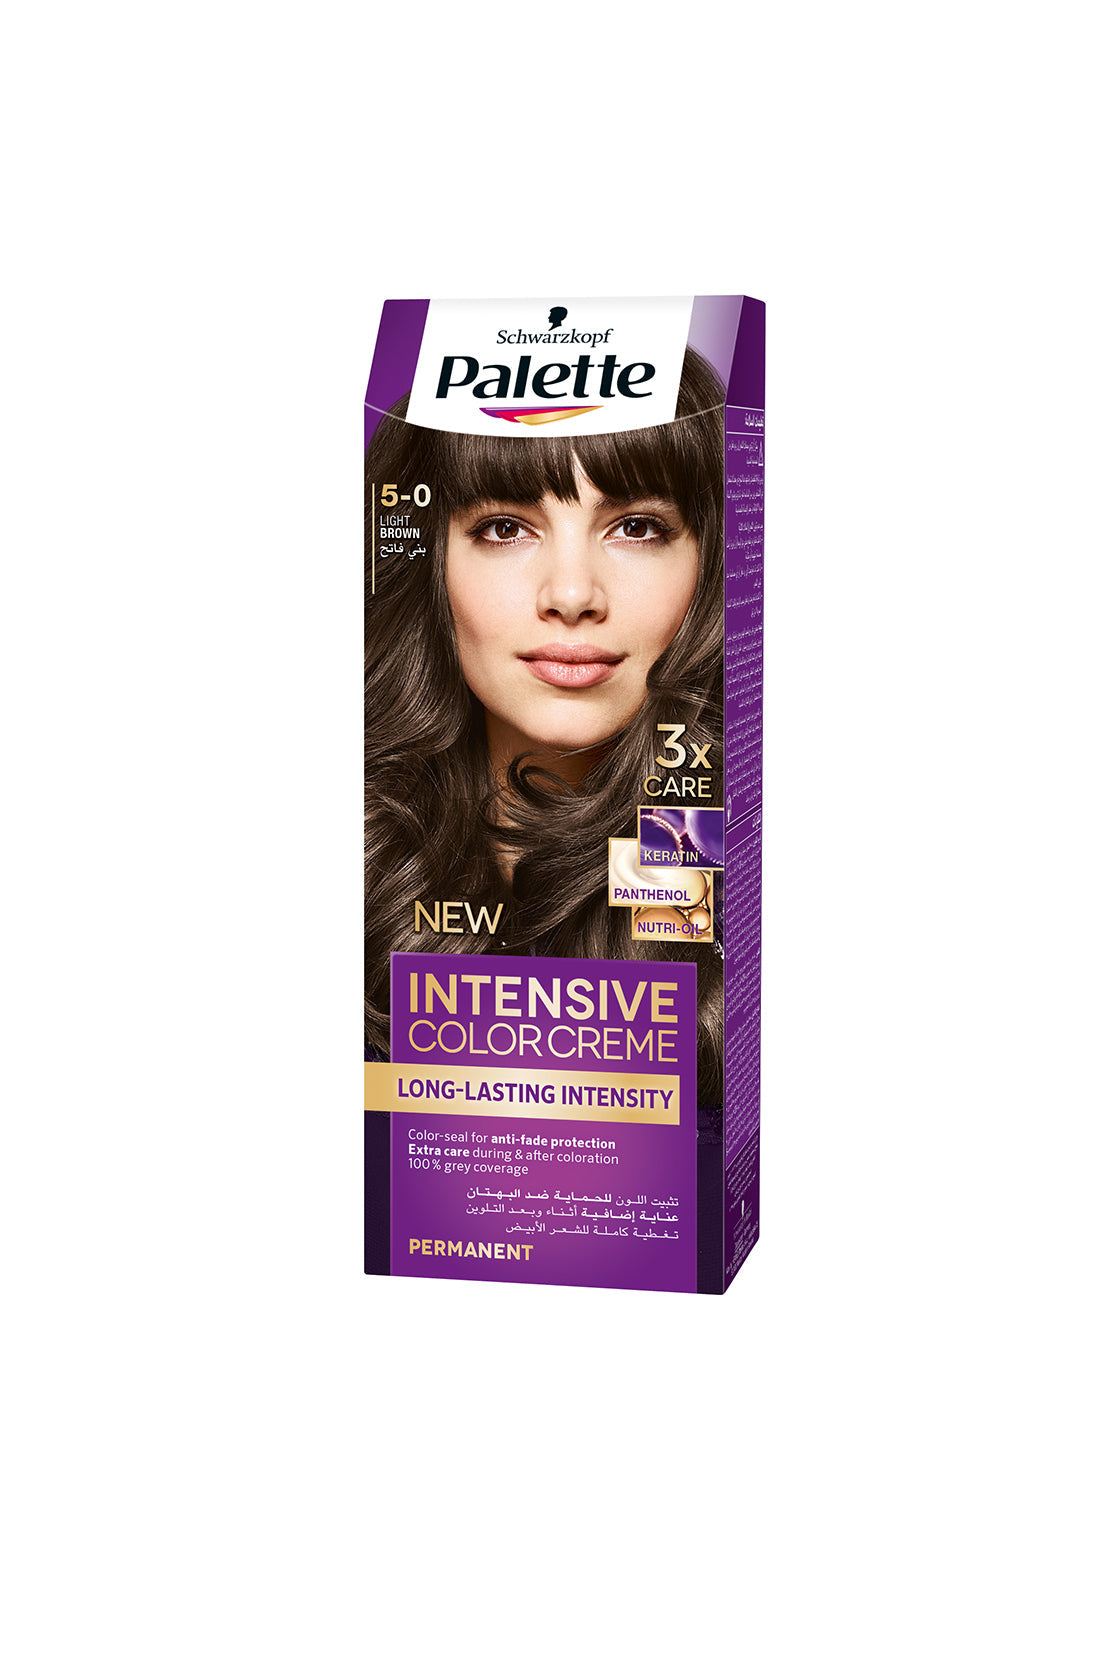 Intensive Color Creme with Long Lasting Intensity (5-0 Light Brown) RIOS